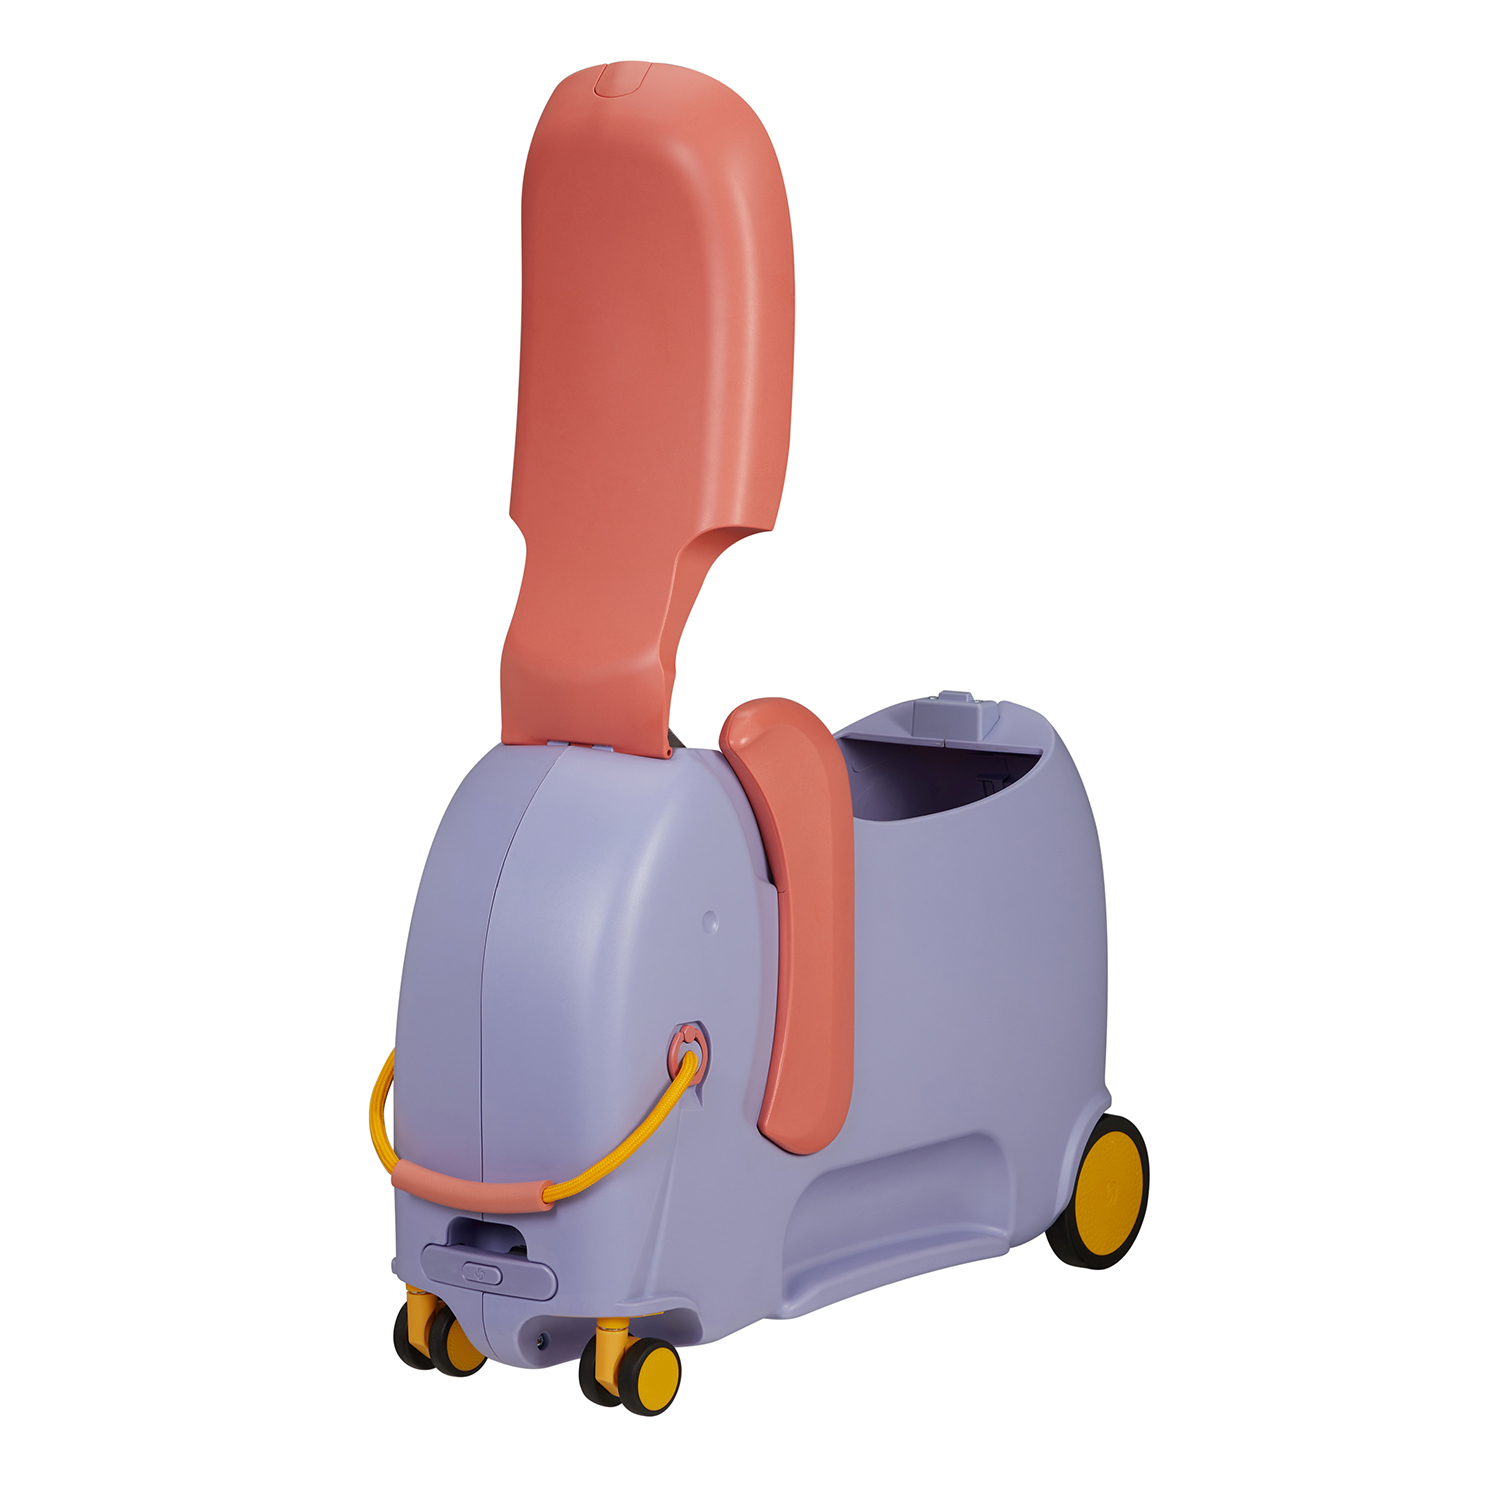 DREAM RIDER DELUXE - RIDE-ON ELEPHANT SCT2-001-SF000*81